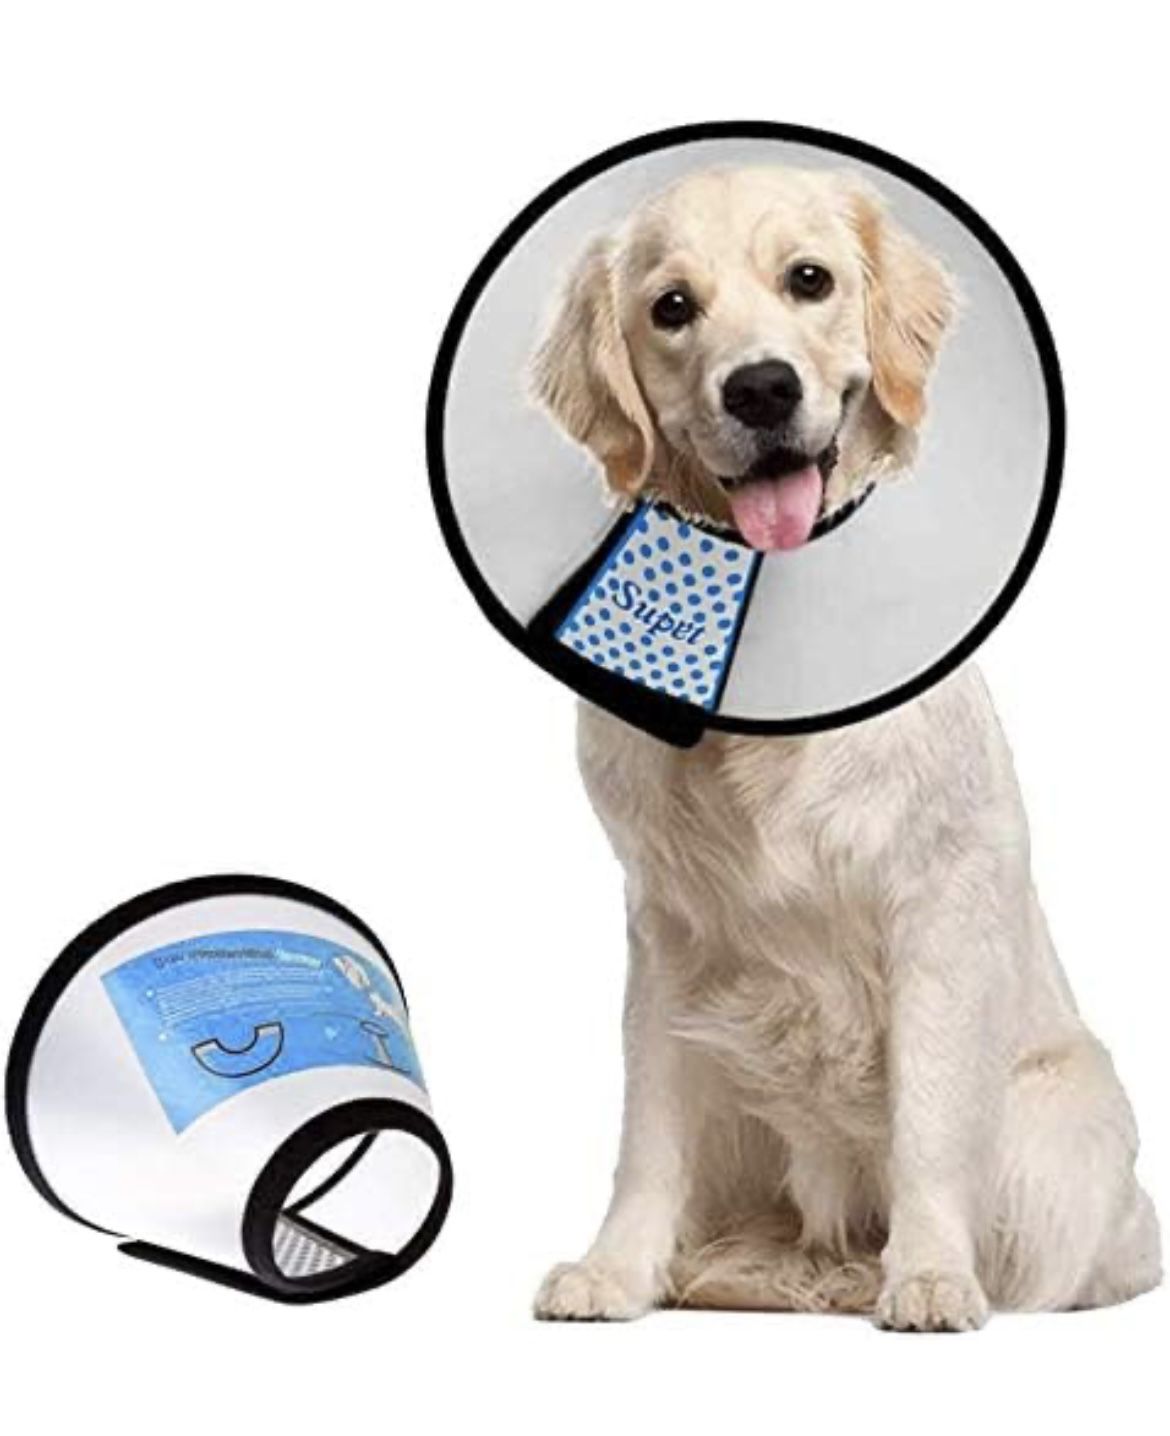 Supet Dog Cone Collar Adjustable After Surgery, Comfy Pet Recovery Collar & Cone for Large Medium Small Dogs, Elizabethan Dog Neck Collar Plastic Prac